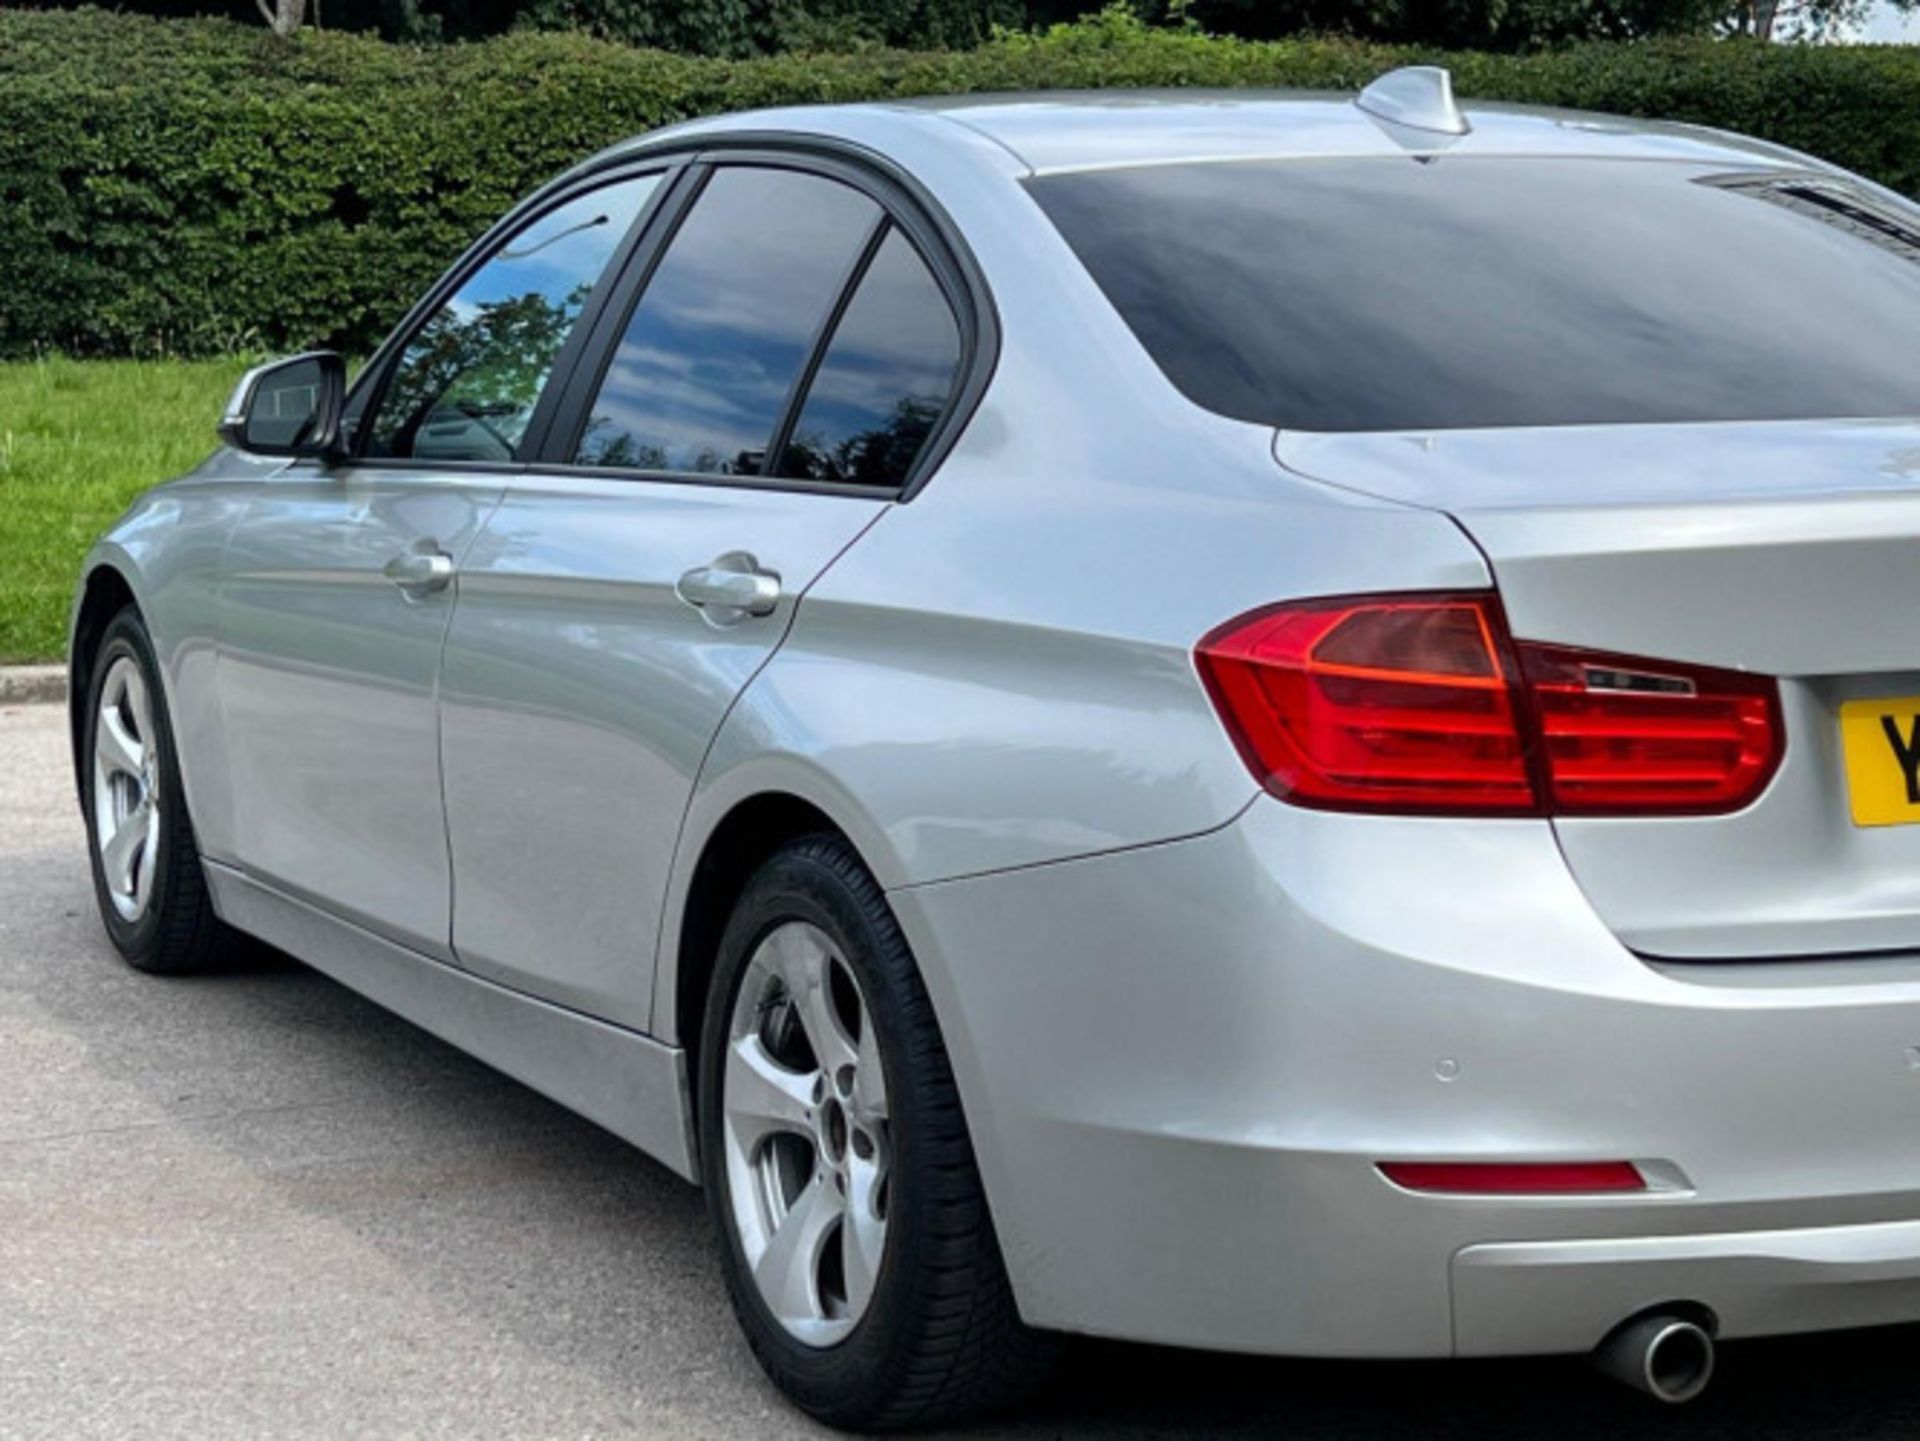 BMW 3 SERIES 2.0 DIESEL ED START STOP - A WELL-MAINTAINED GEM >>--NO VAT ON HAMMER--<< - Image 218 of 229